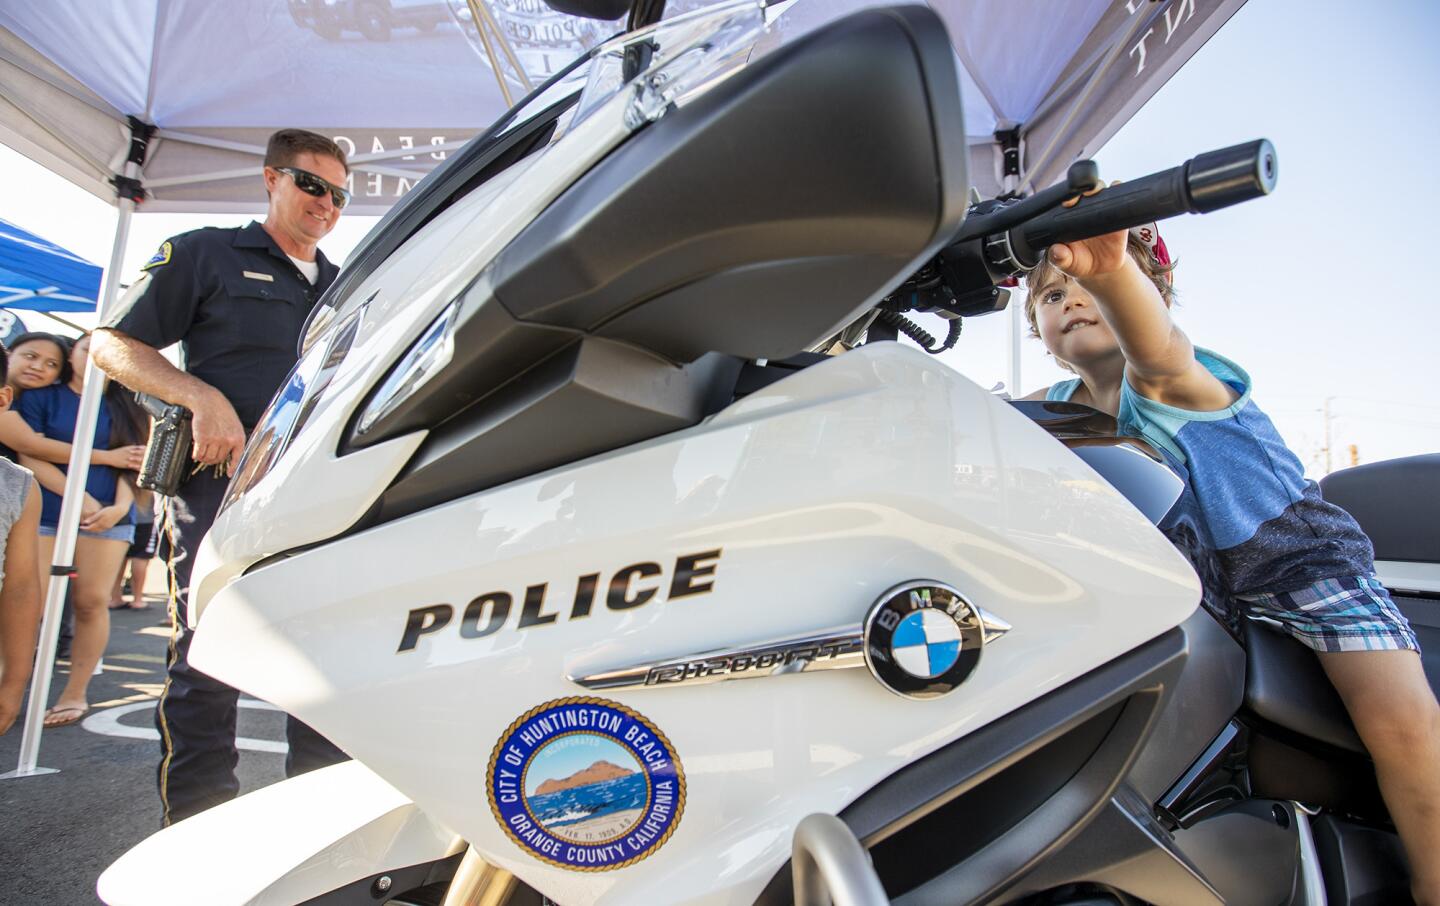 Huntington Beach Police Officer Bobby Frahm looks on as Levi Bonjean, 2, sits on his motorcycle. The Huntington Beach police and fire departments participate in the National Night Out event at the Target shopping center at Adams Avenue and Brookhurst Street on Tuesday, August 7.